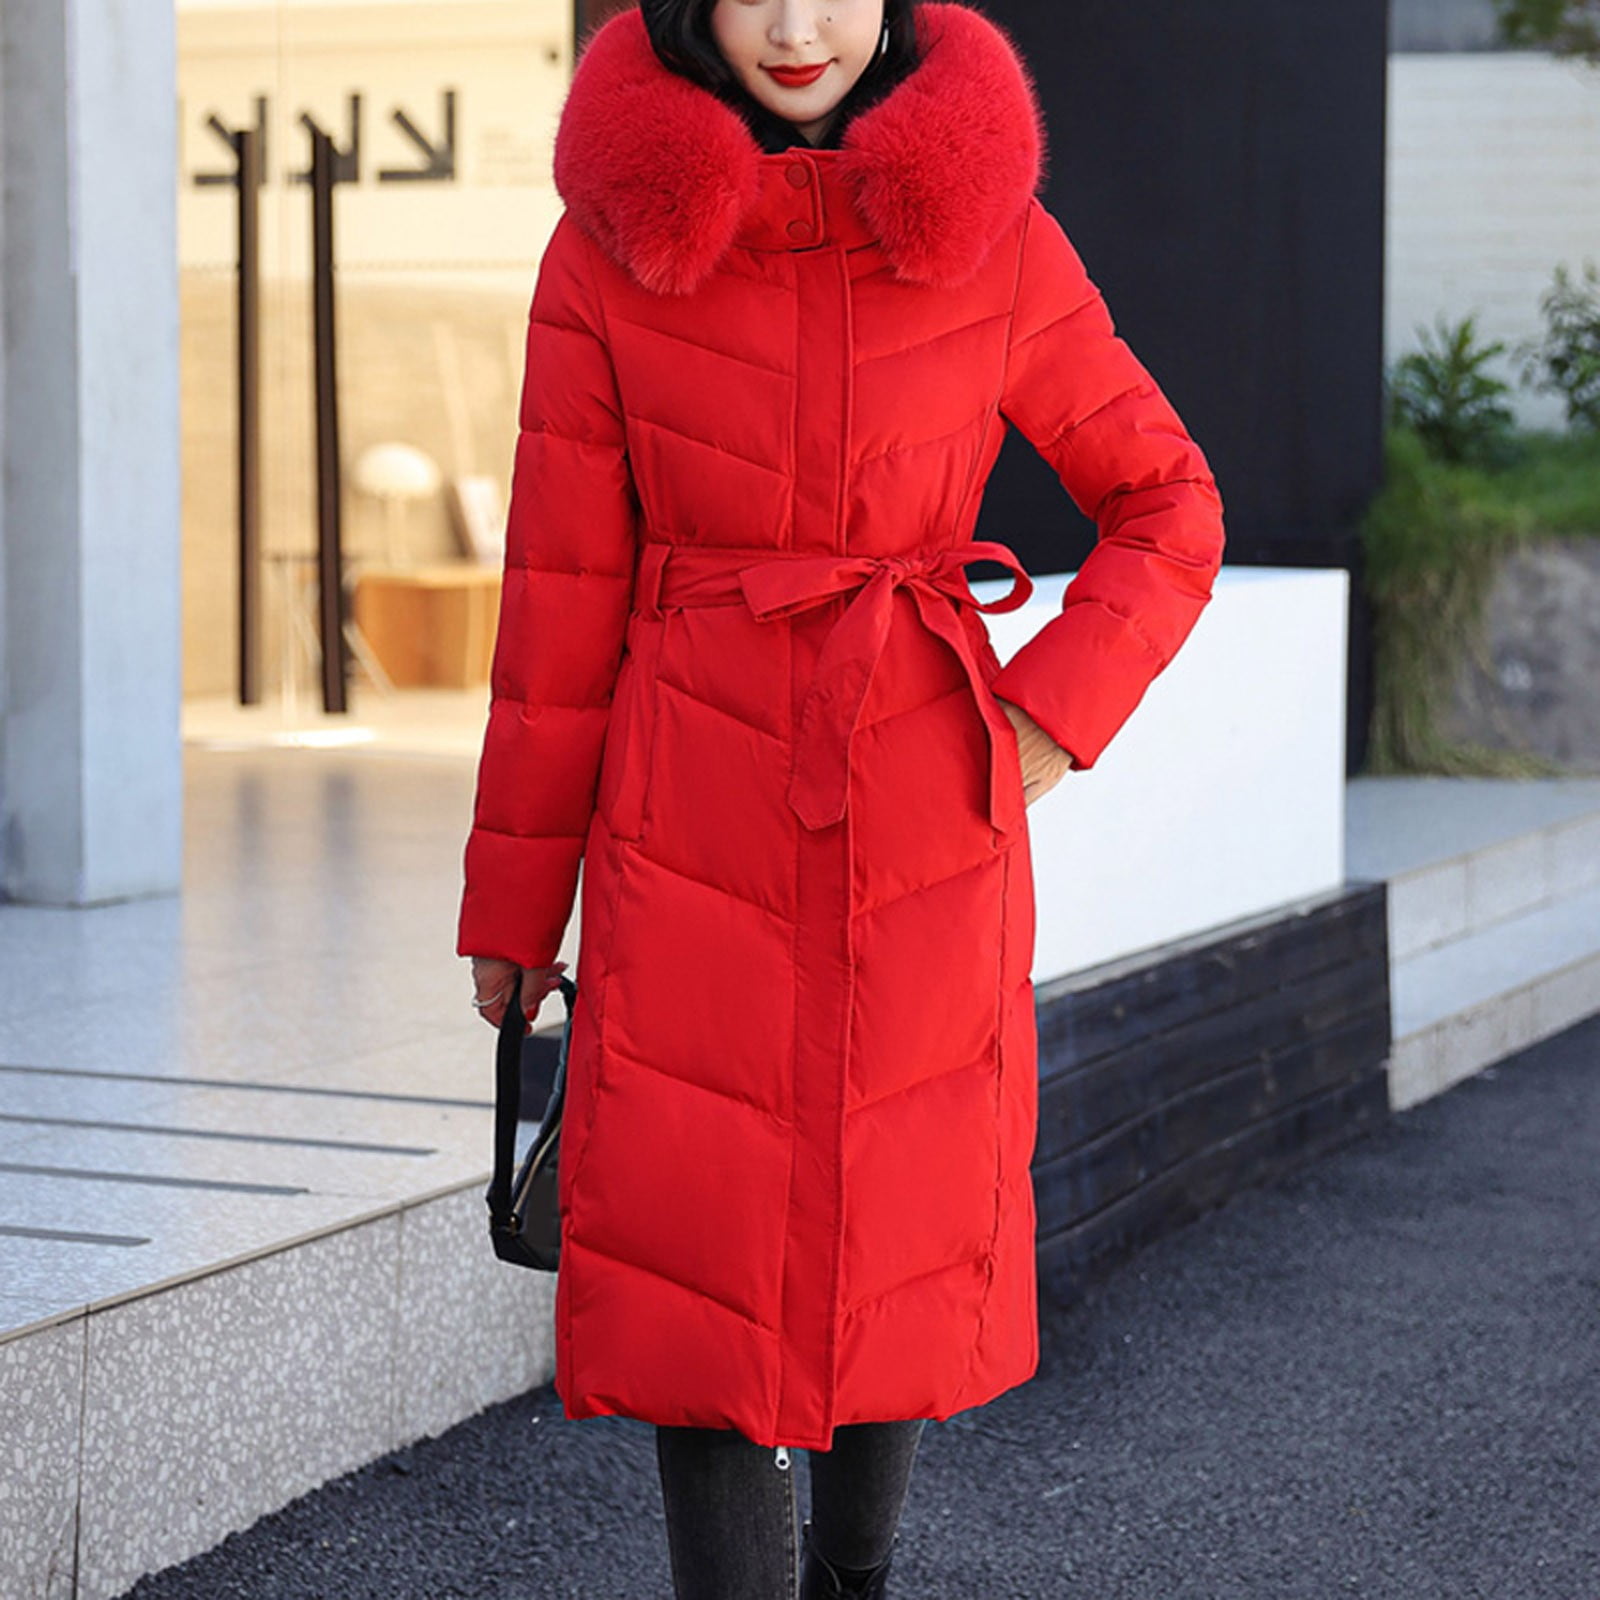 Aayomet Coats For Women Winter Womens Fashion Horn Button Thicken Coat with  Hood Winter Warm Jacket,Red L 